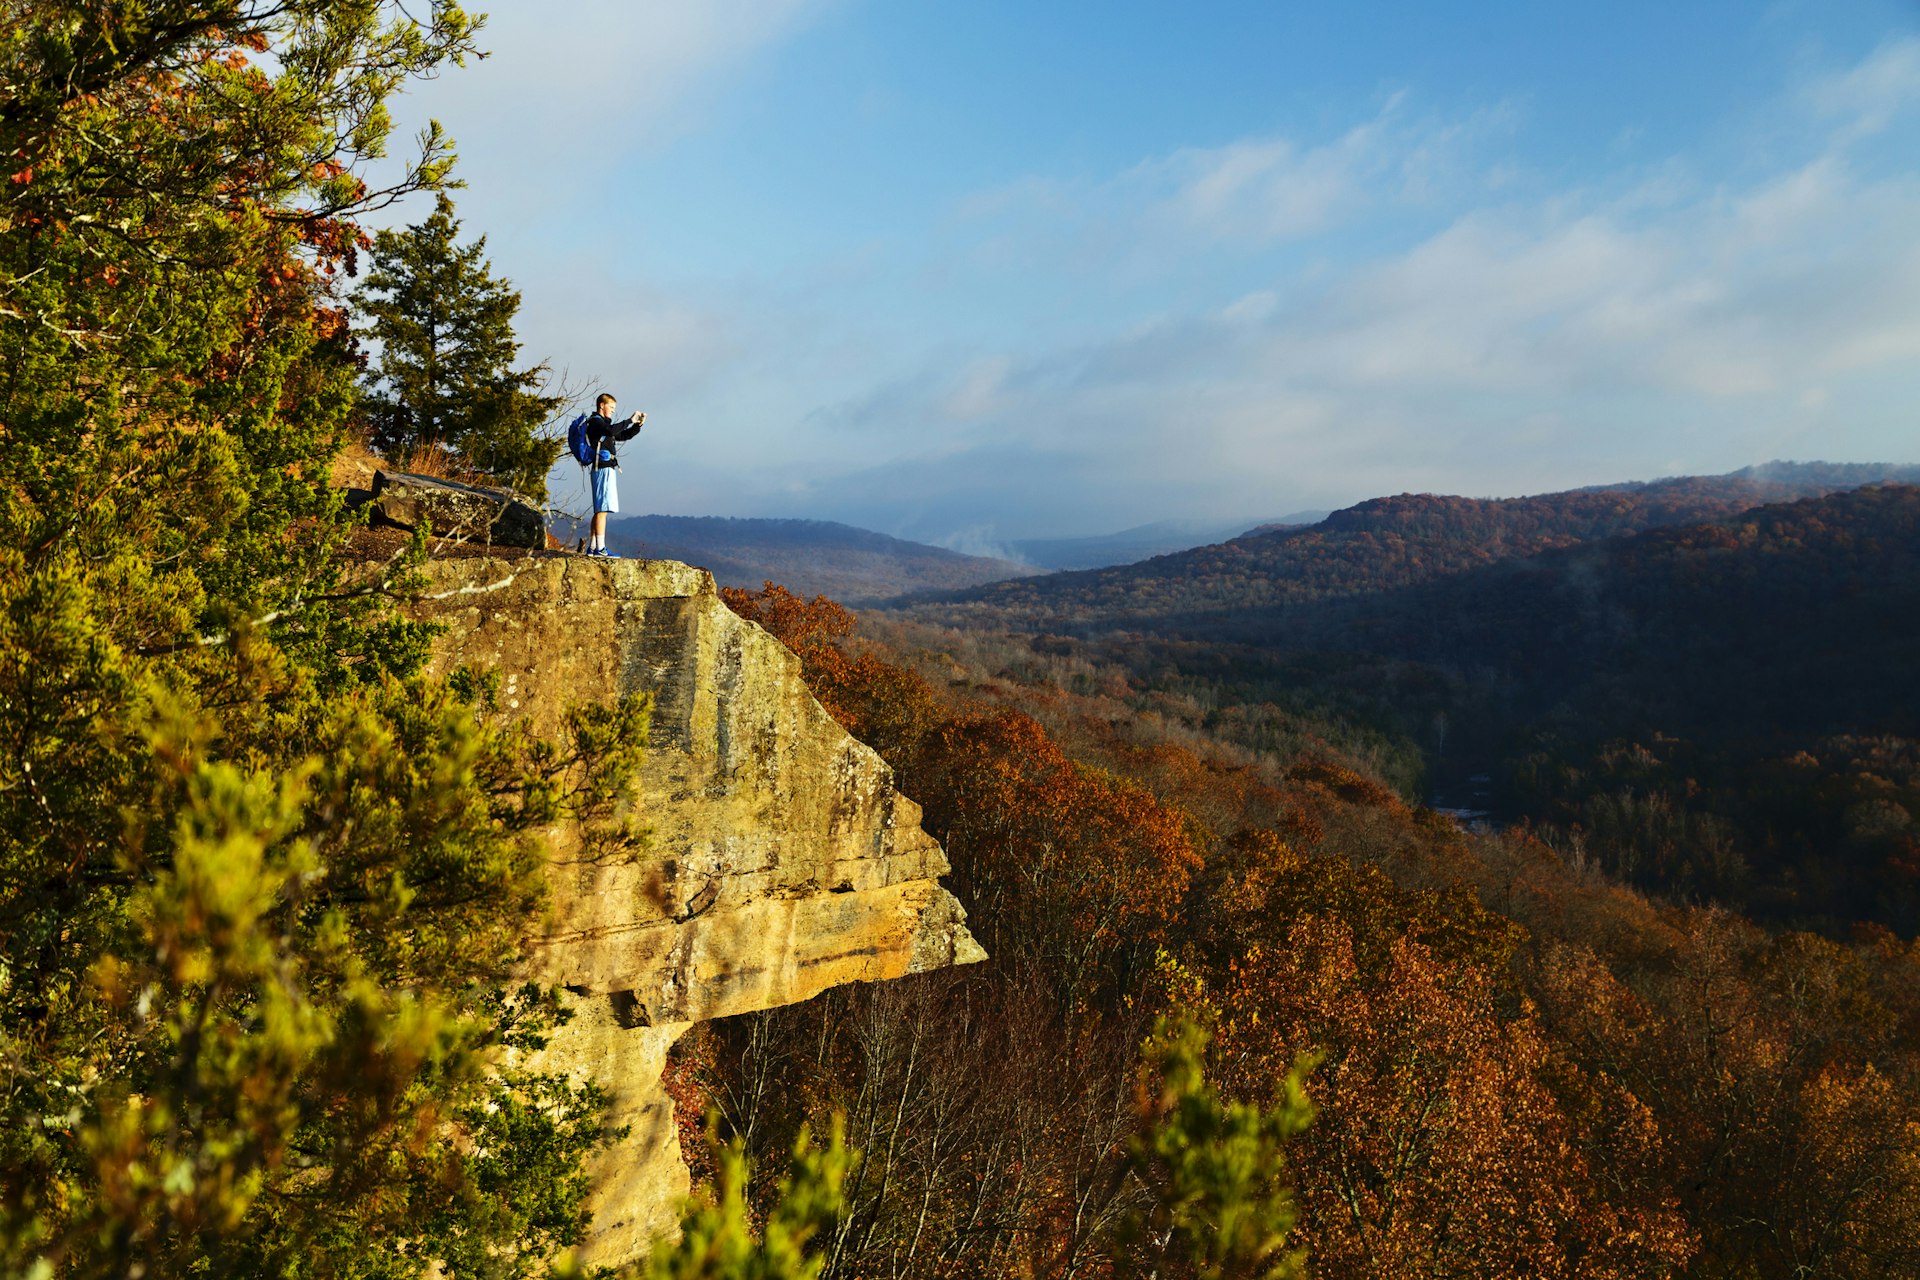 A solo hiker stands on a rocky outcrop taking a photo of the landscape in Devil's Den State Park, Arkansas